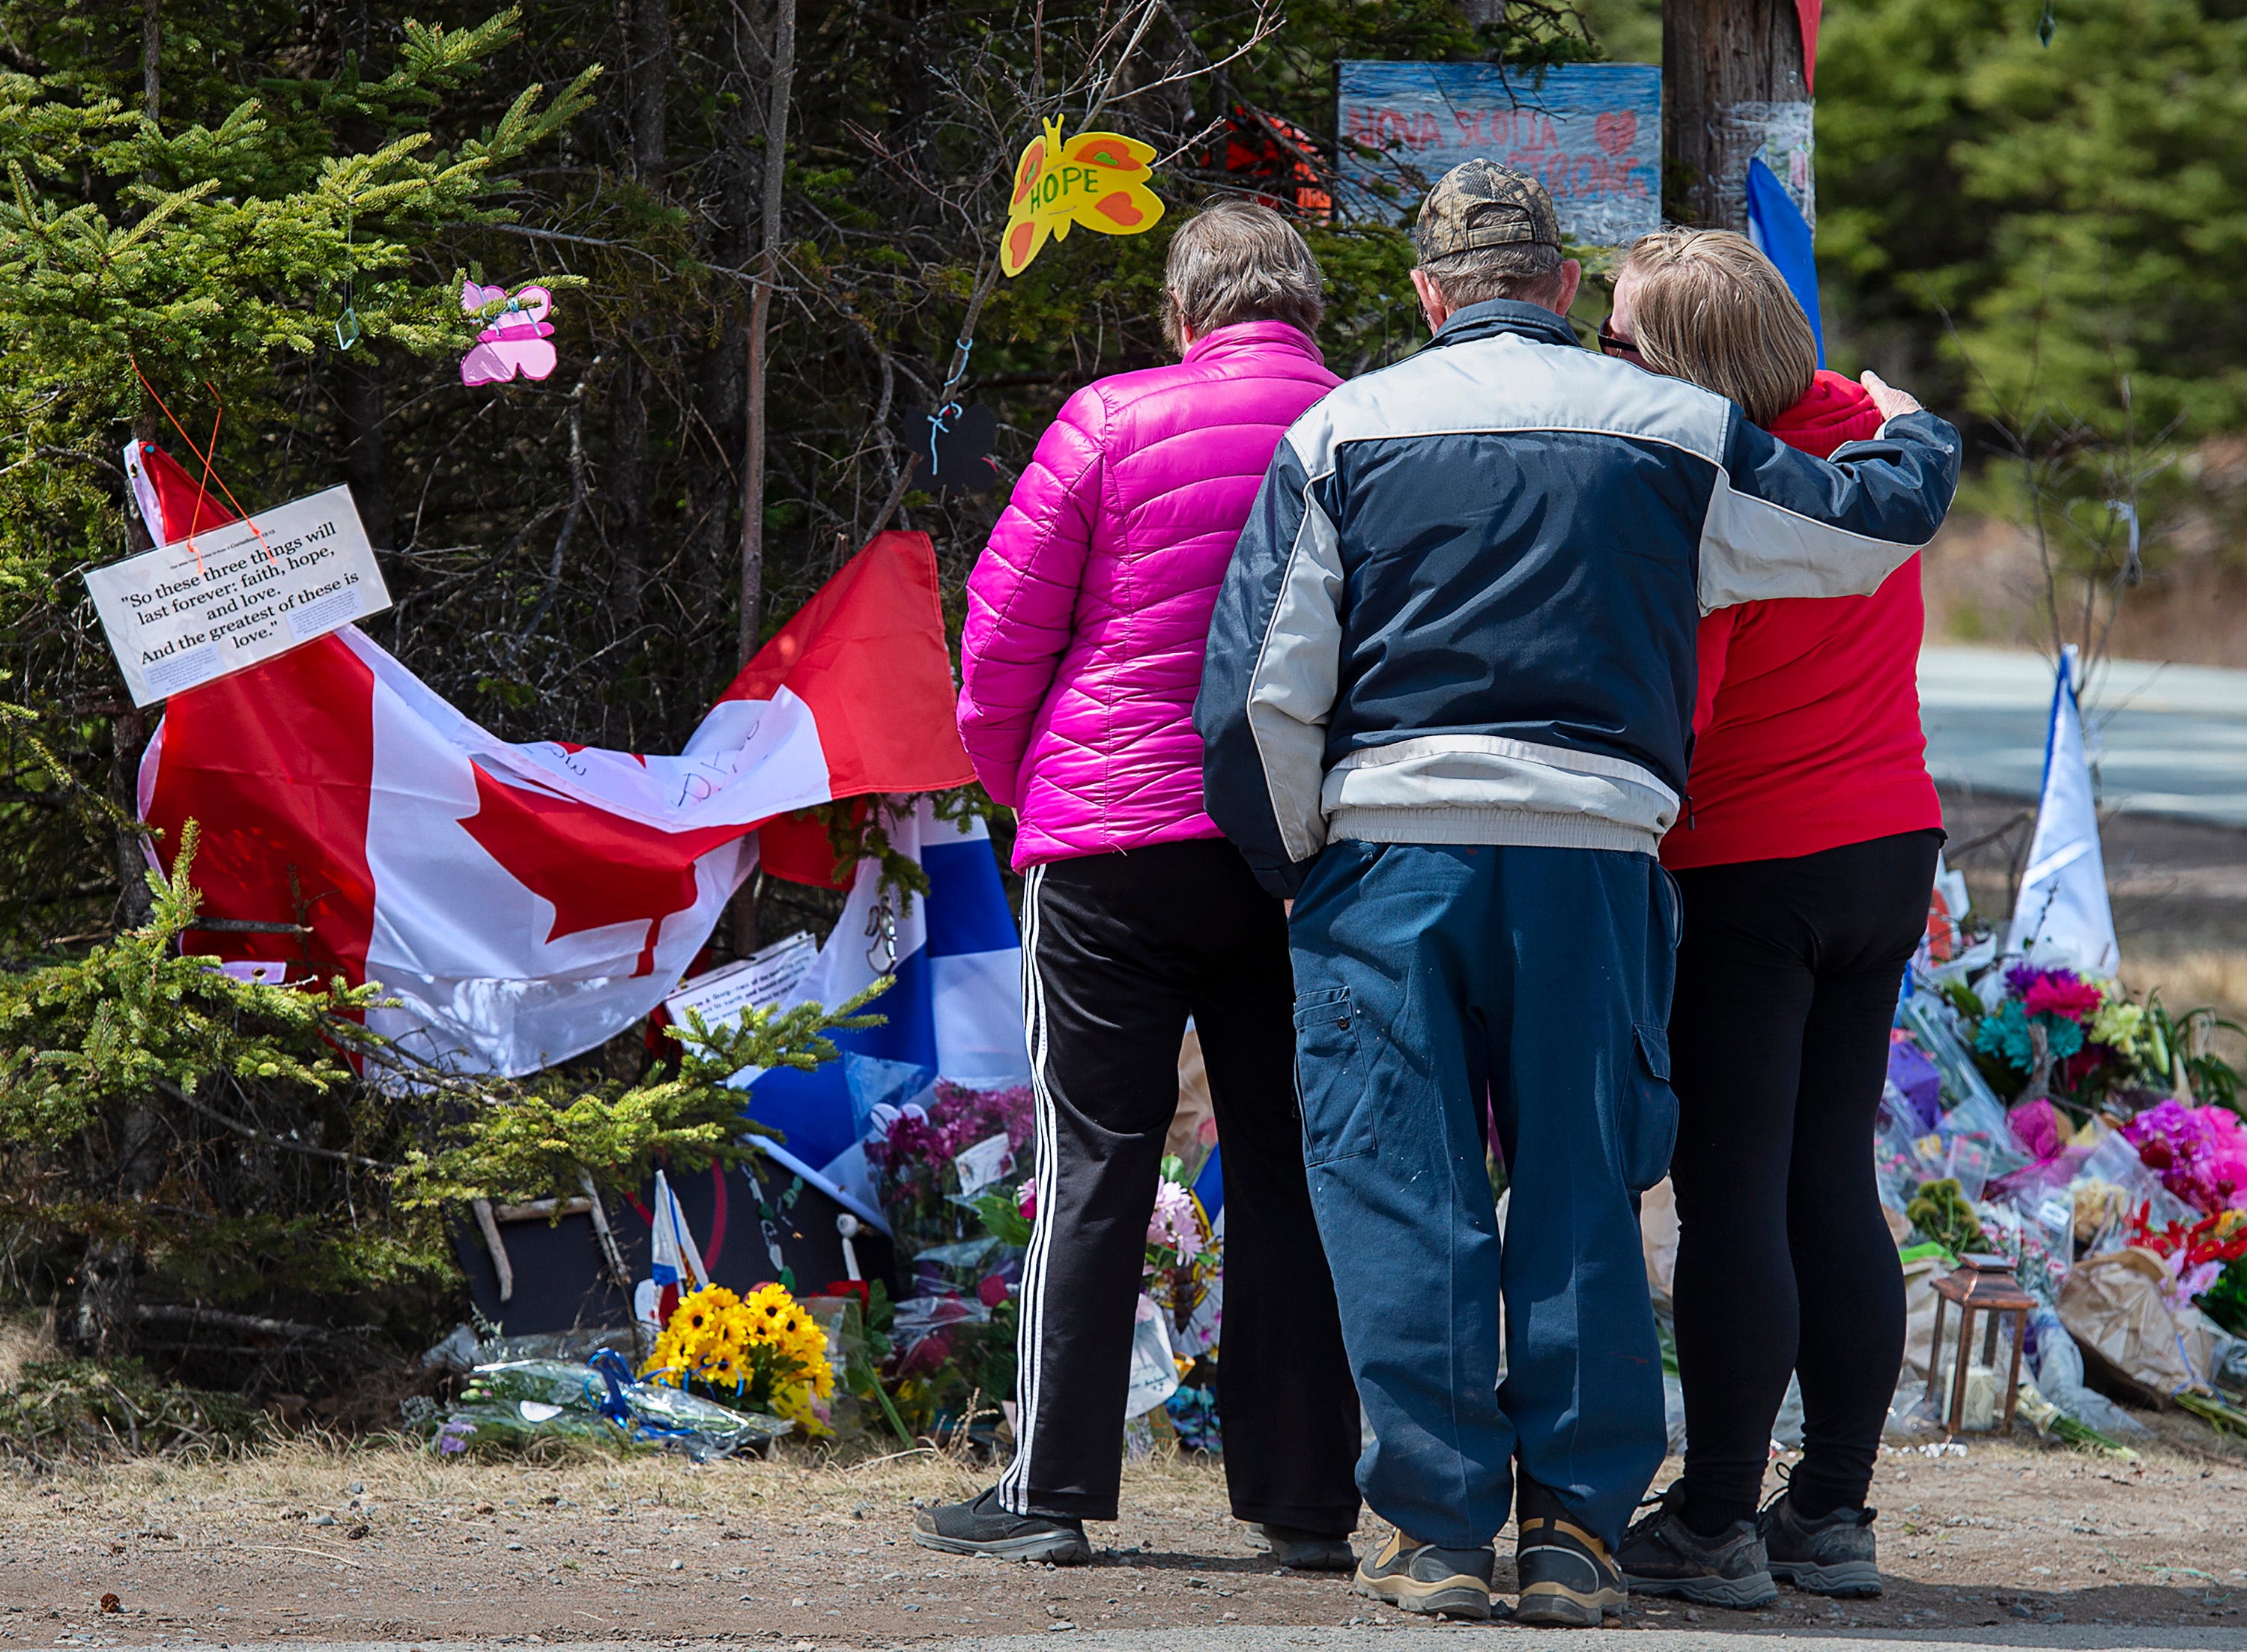 A family pays their respects to victims of the mass killings at a checkpoint on Portapique Road in Portapique, Nova Scotia, on Friday, April 24, 2020. A man, wearing a police uniform and driving a mock-up cruiser, killed 22 people in a murder rampage in Portapique and several other Nova Scotia communities.